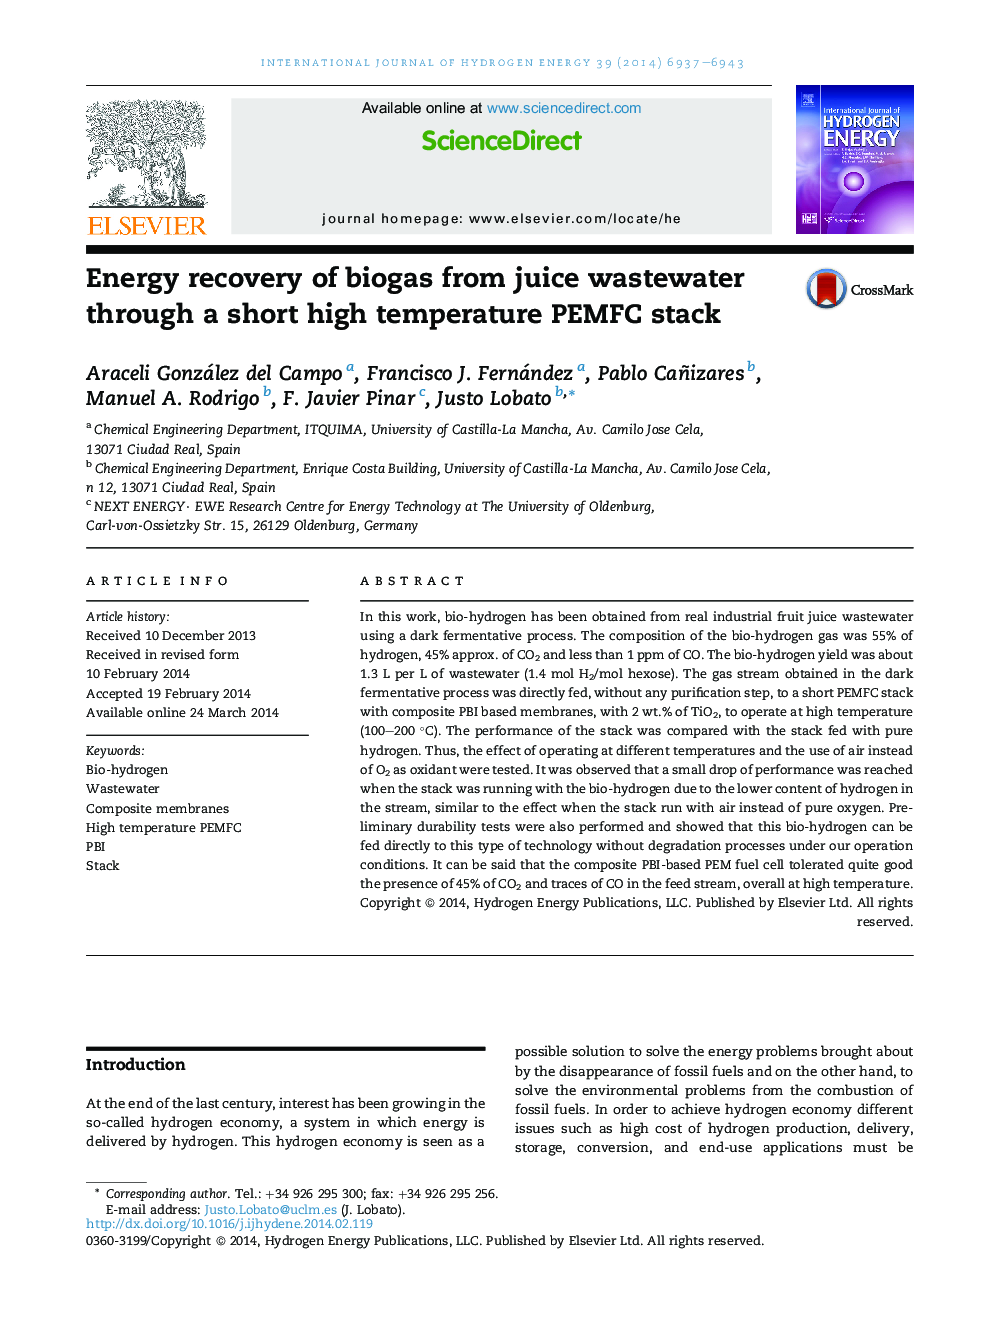 Energy recovery of biogas from juice wastewater through a short high temperature PEMFC stack